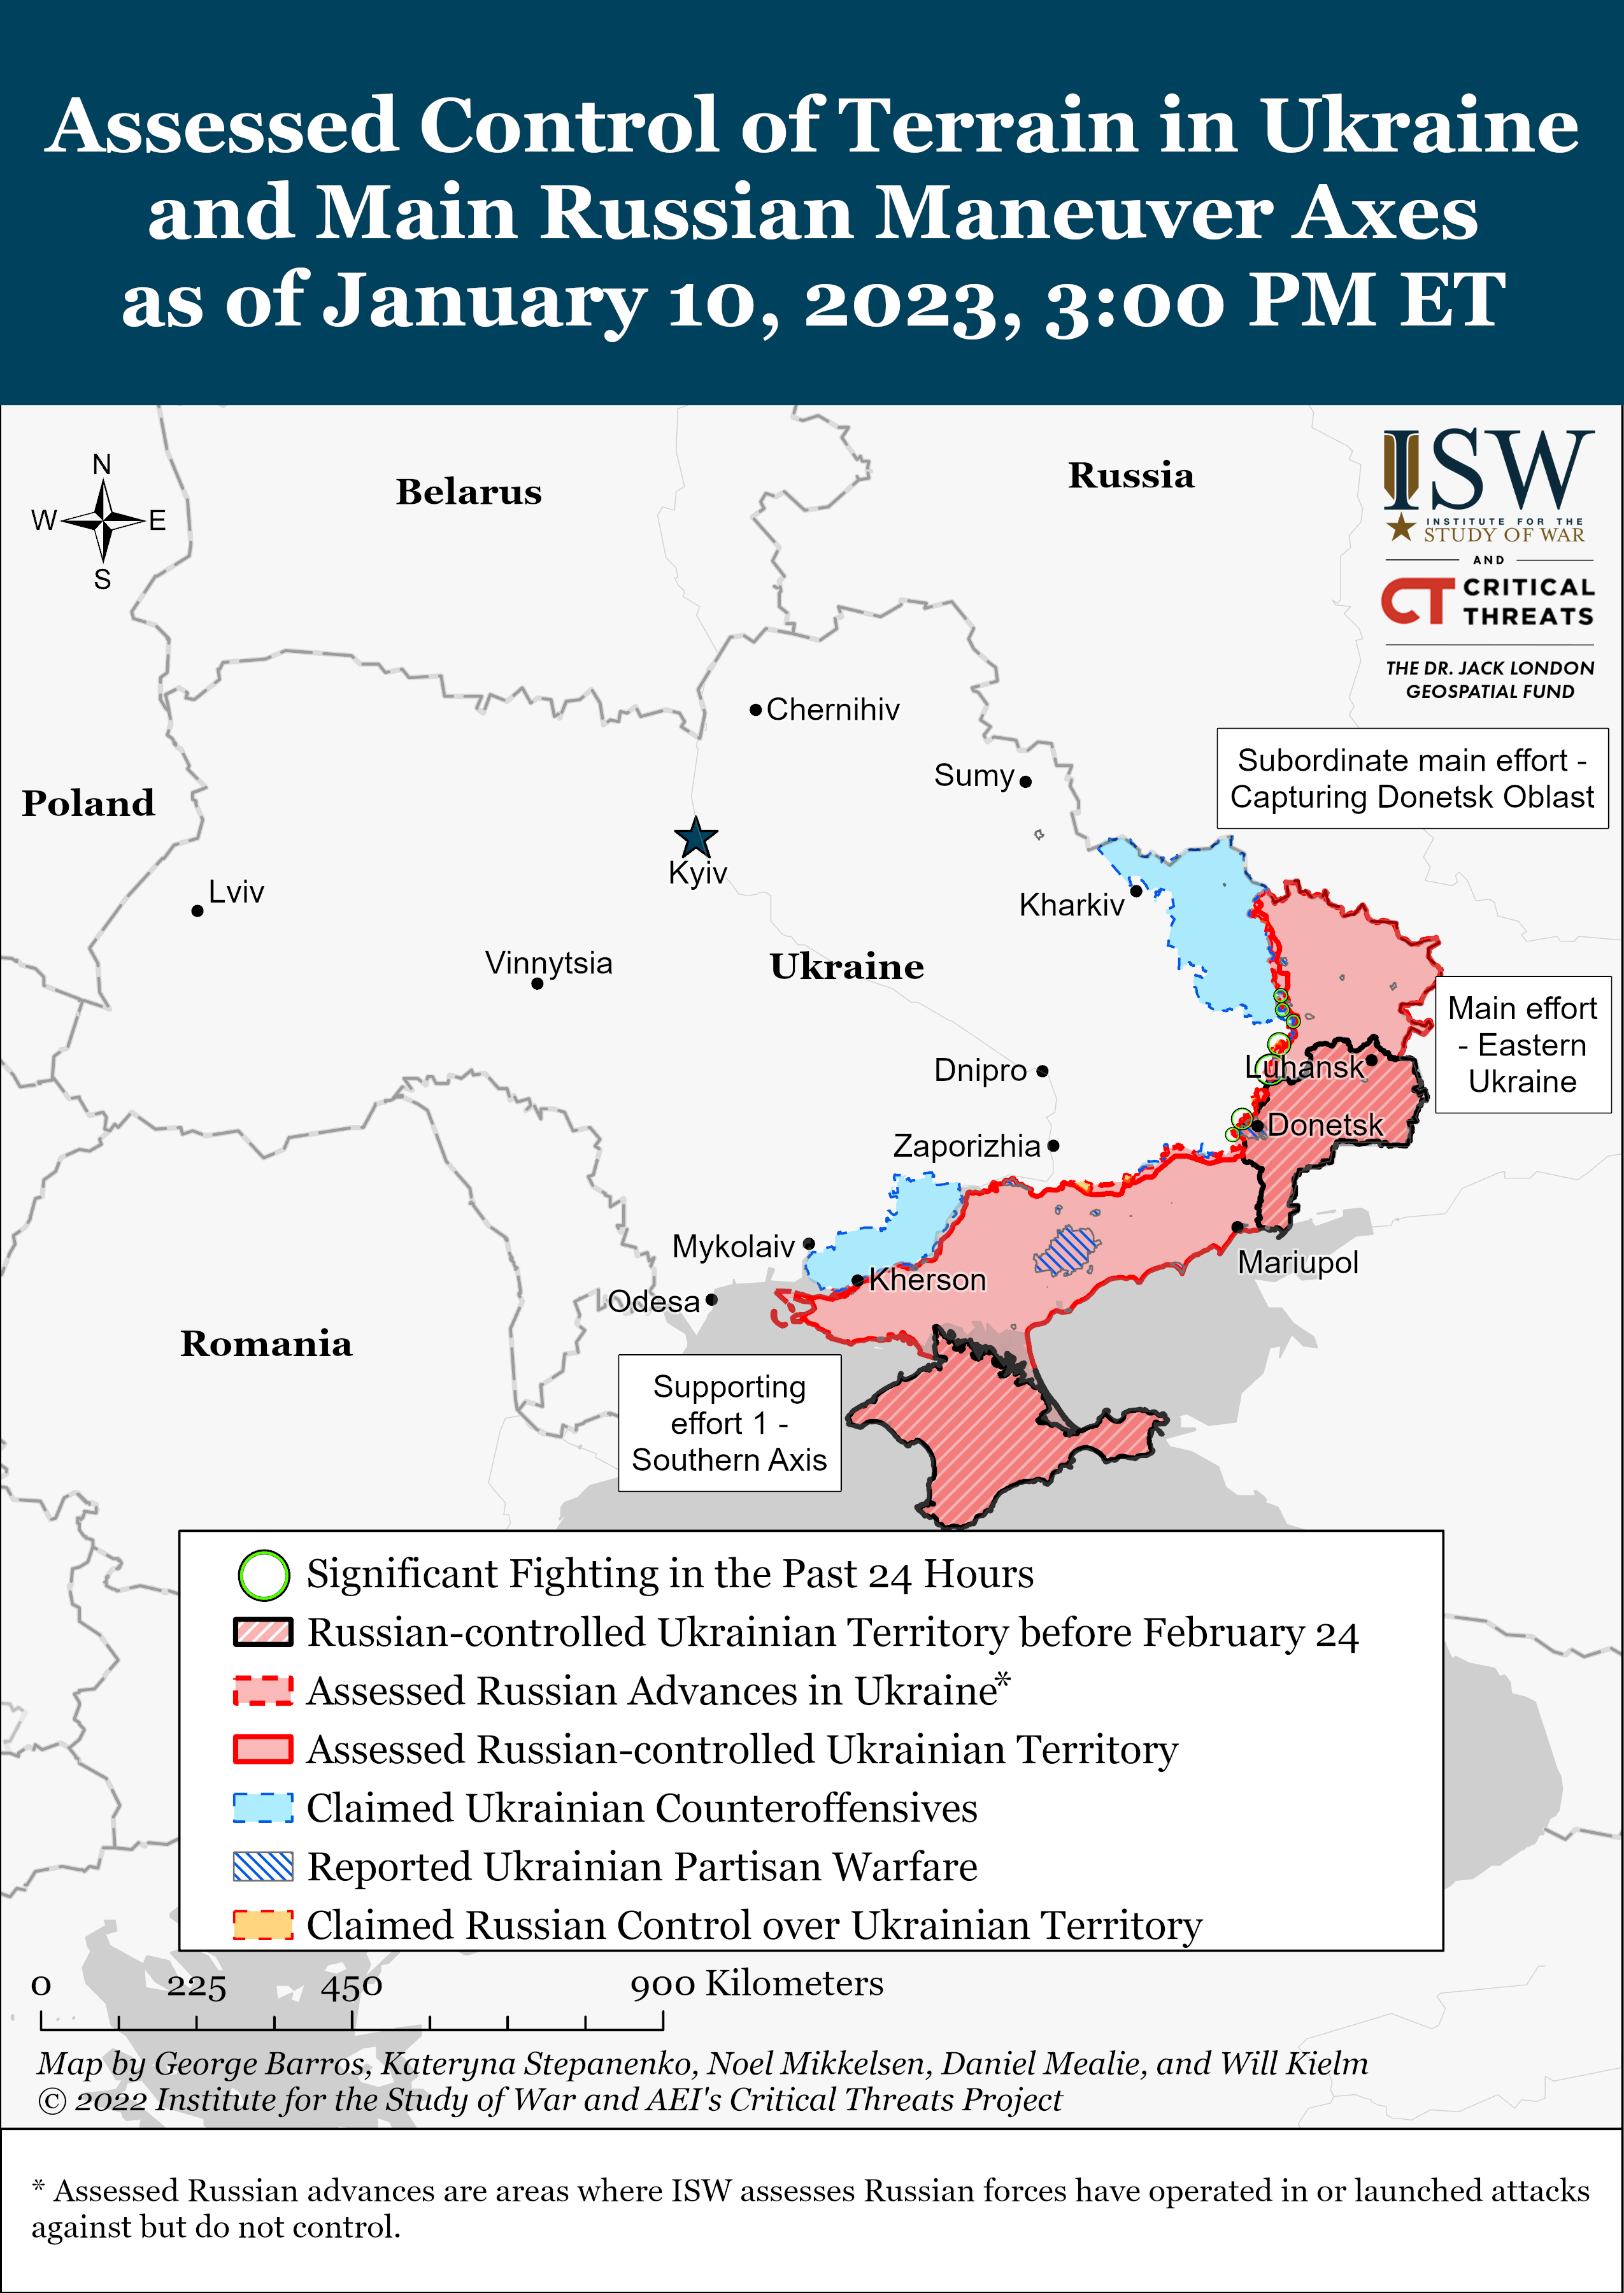 Russian Offensive Campaign Assessment, January 10, 2023